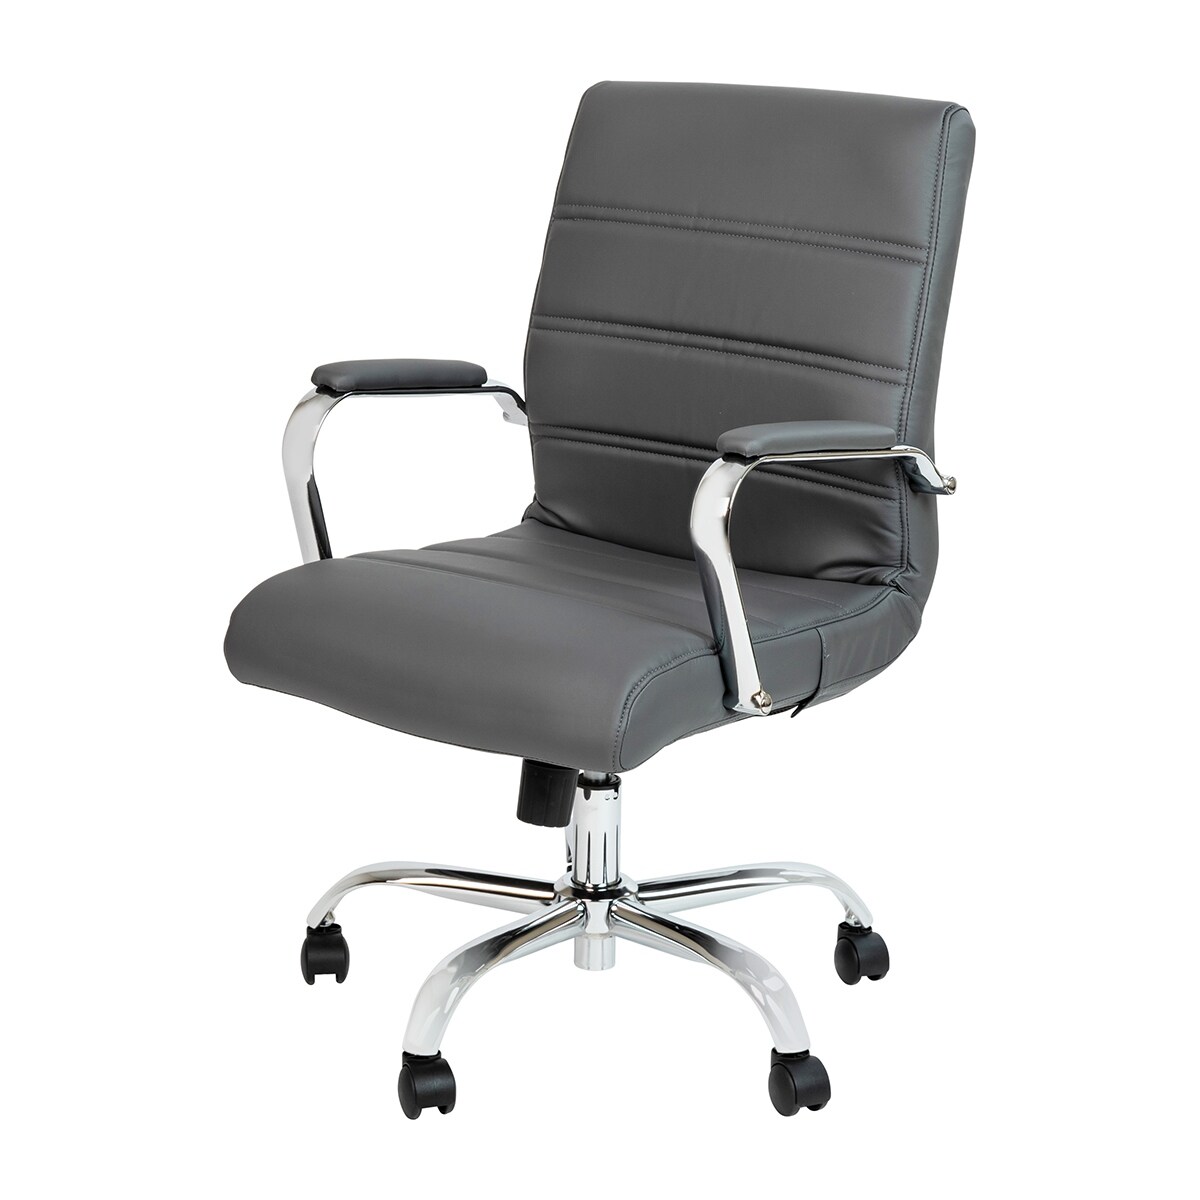 Offex Mid-Back Gray LeatherSoft Executive Swivel Office Chair w/ Arms